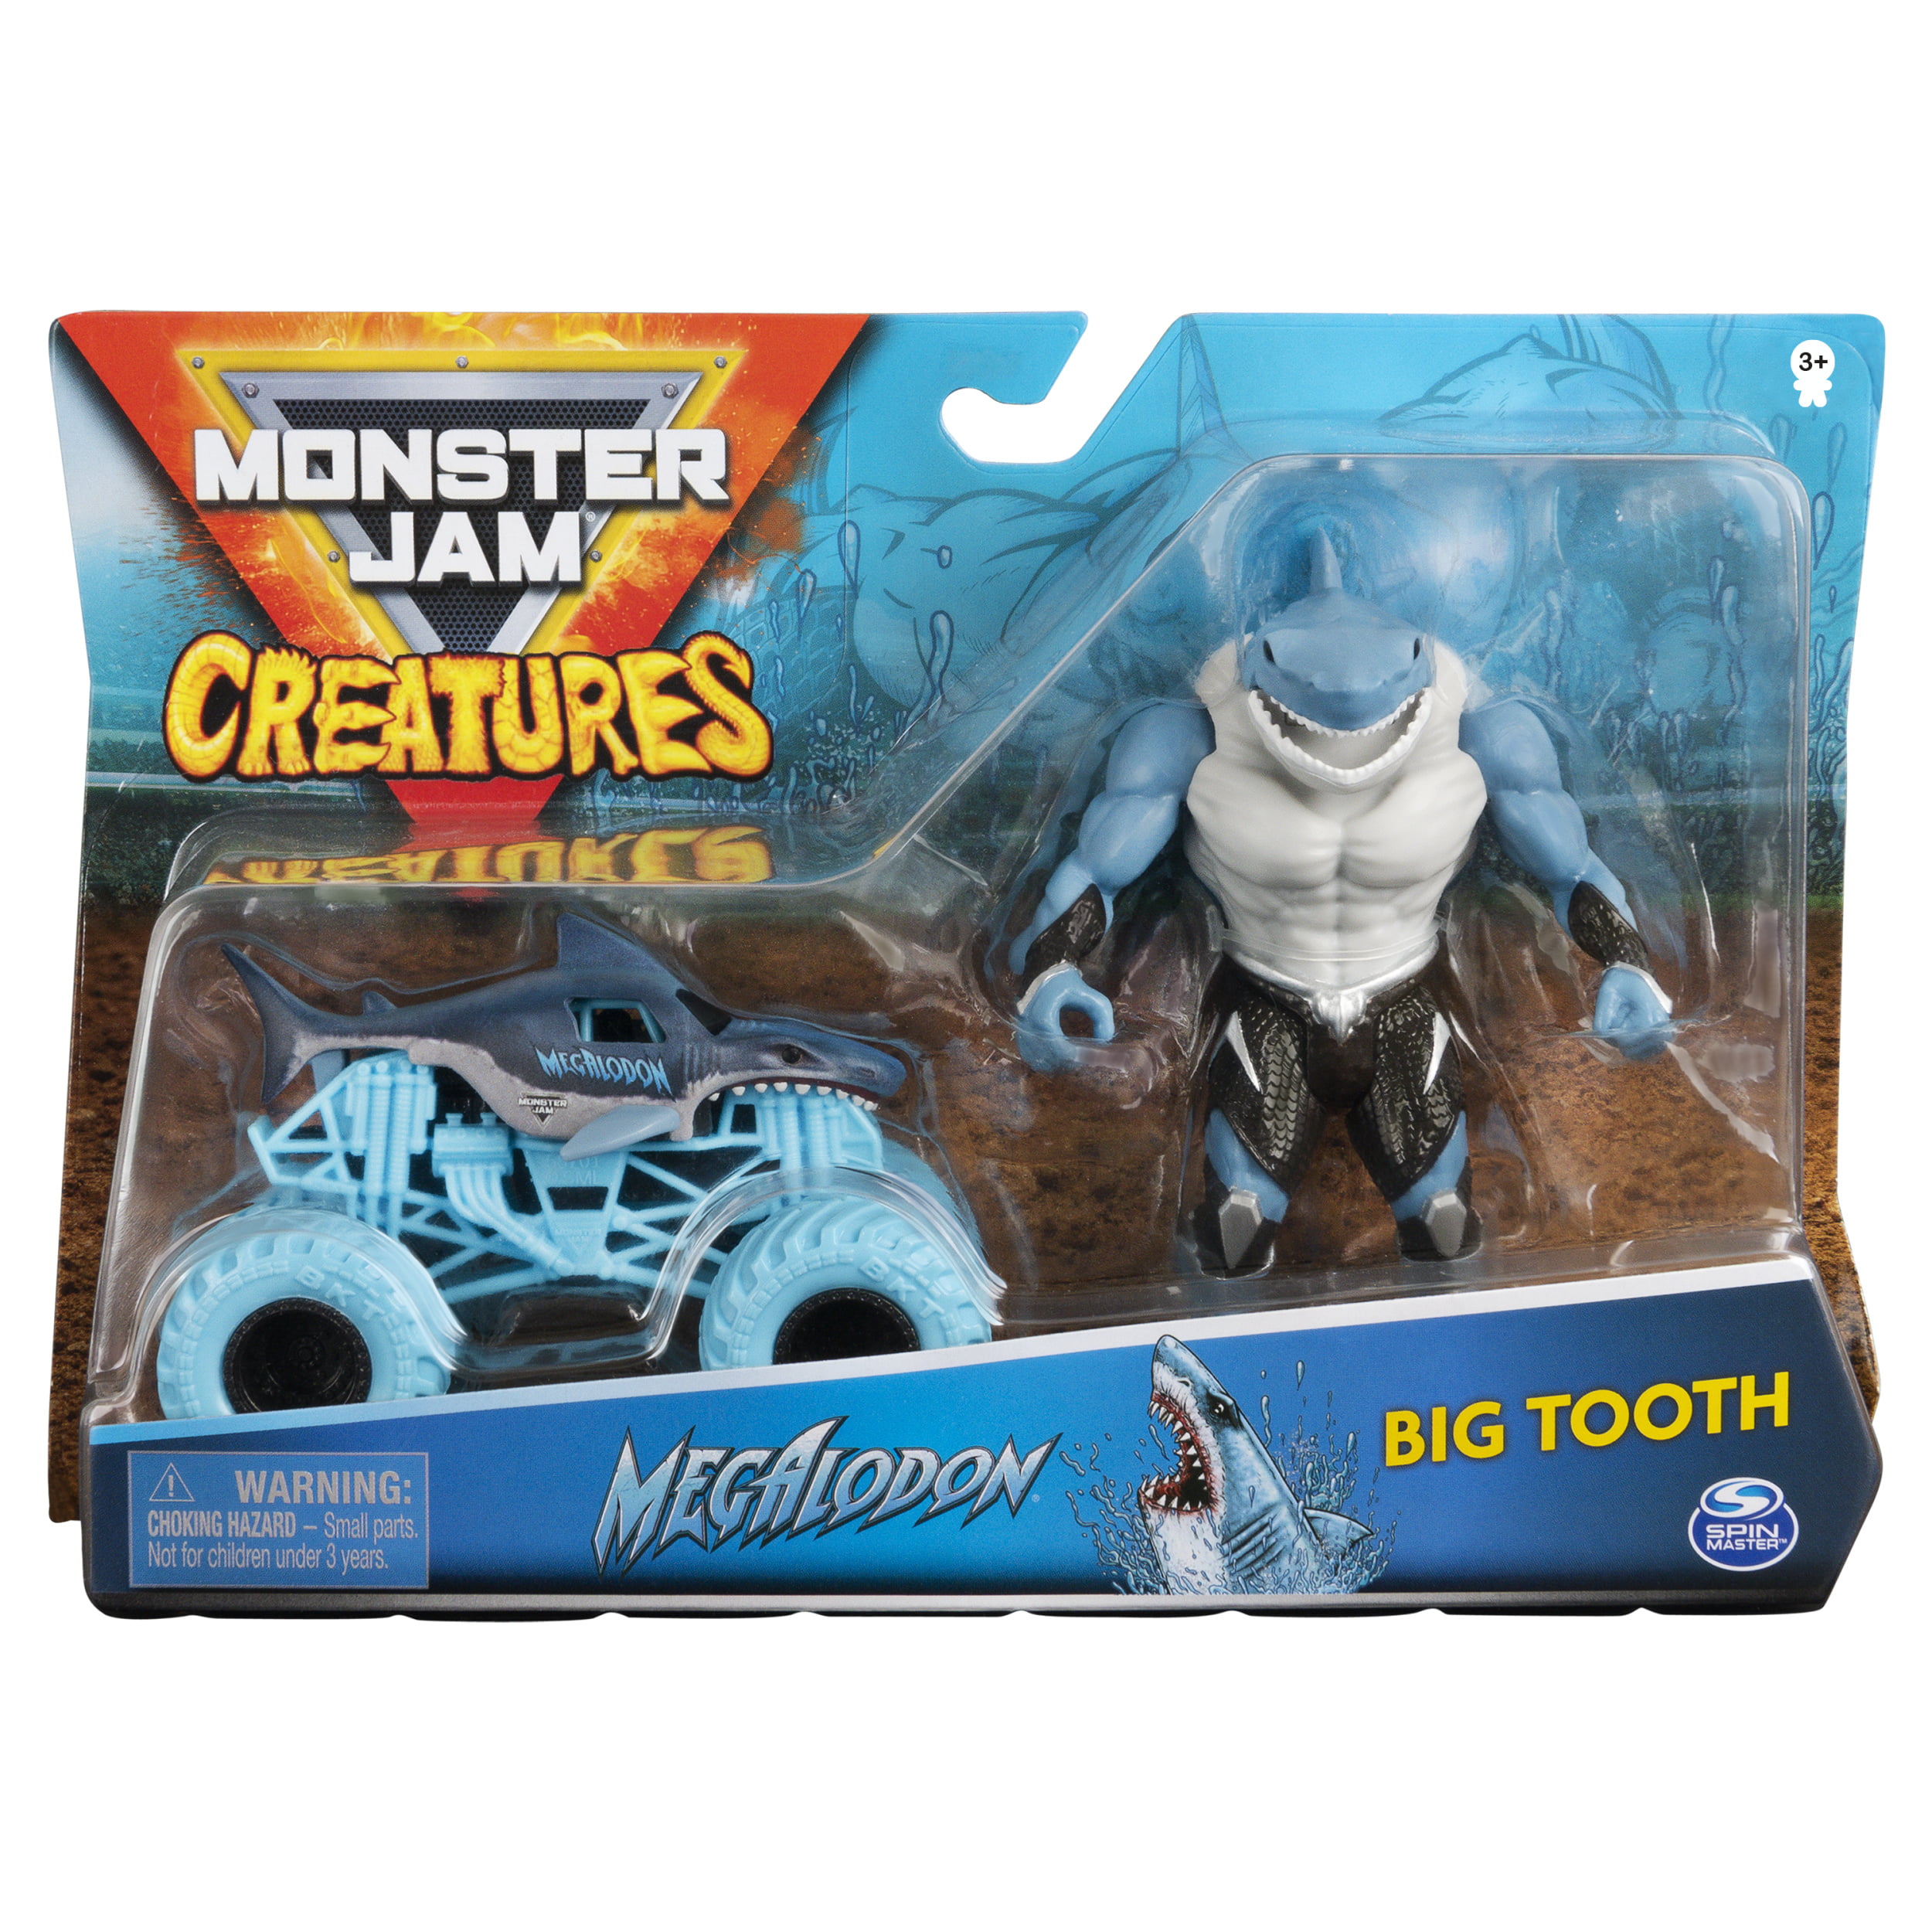  Monster Jam 2021 Target Exclusive Breaking World Records Series  1:64 Scale Diecast Monster Truck with Flag: Megalodon : Toys & Games